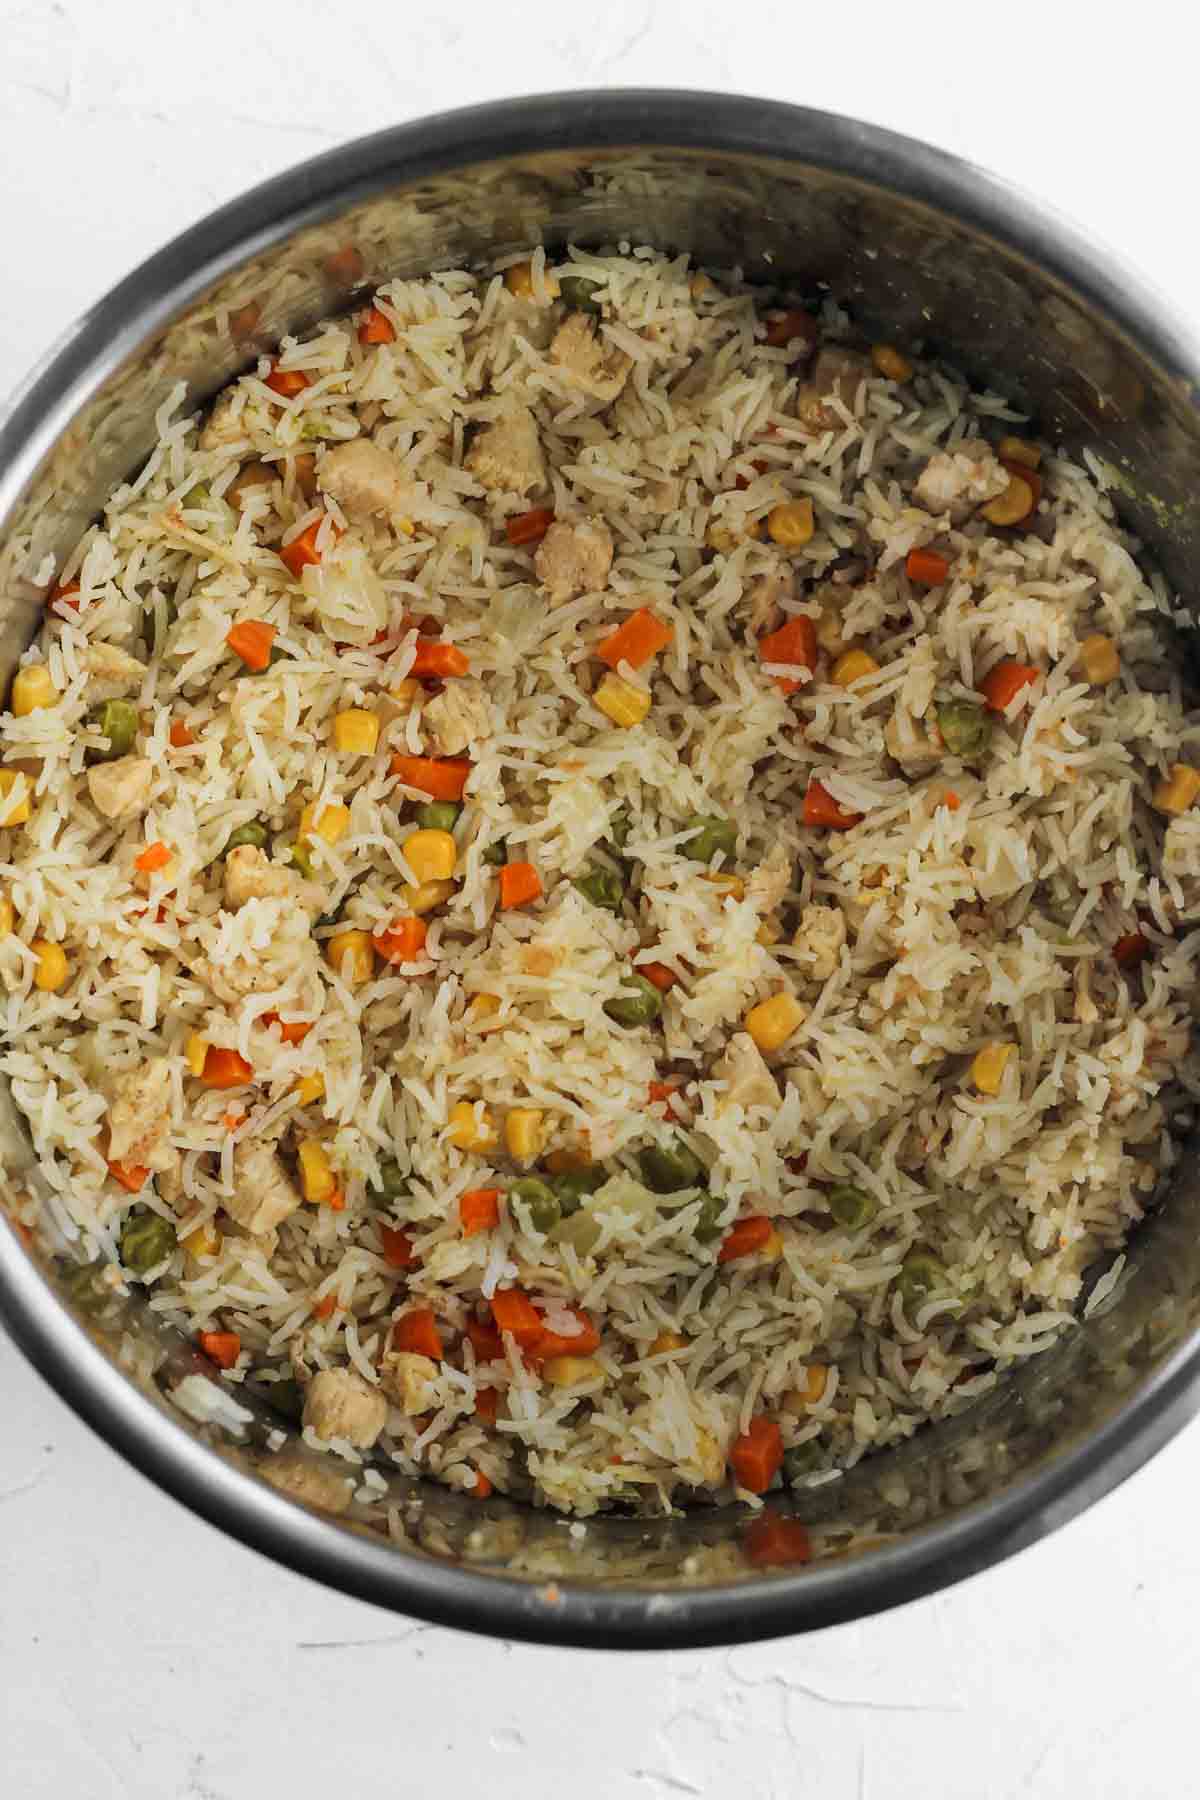 Cooked rice and veggies in the instant pot.